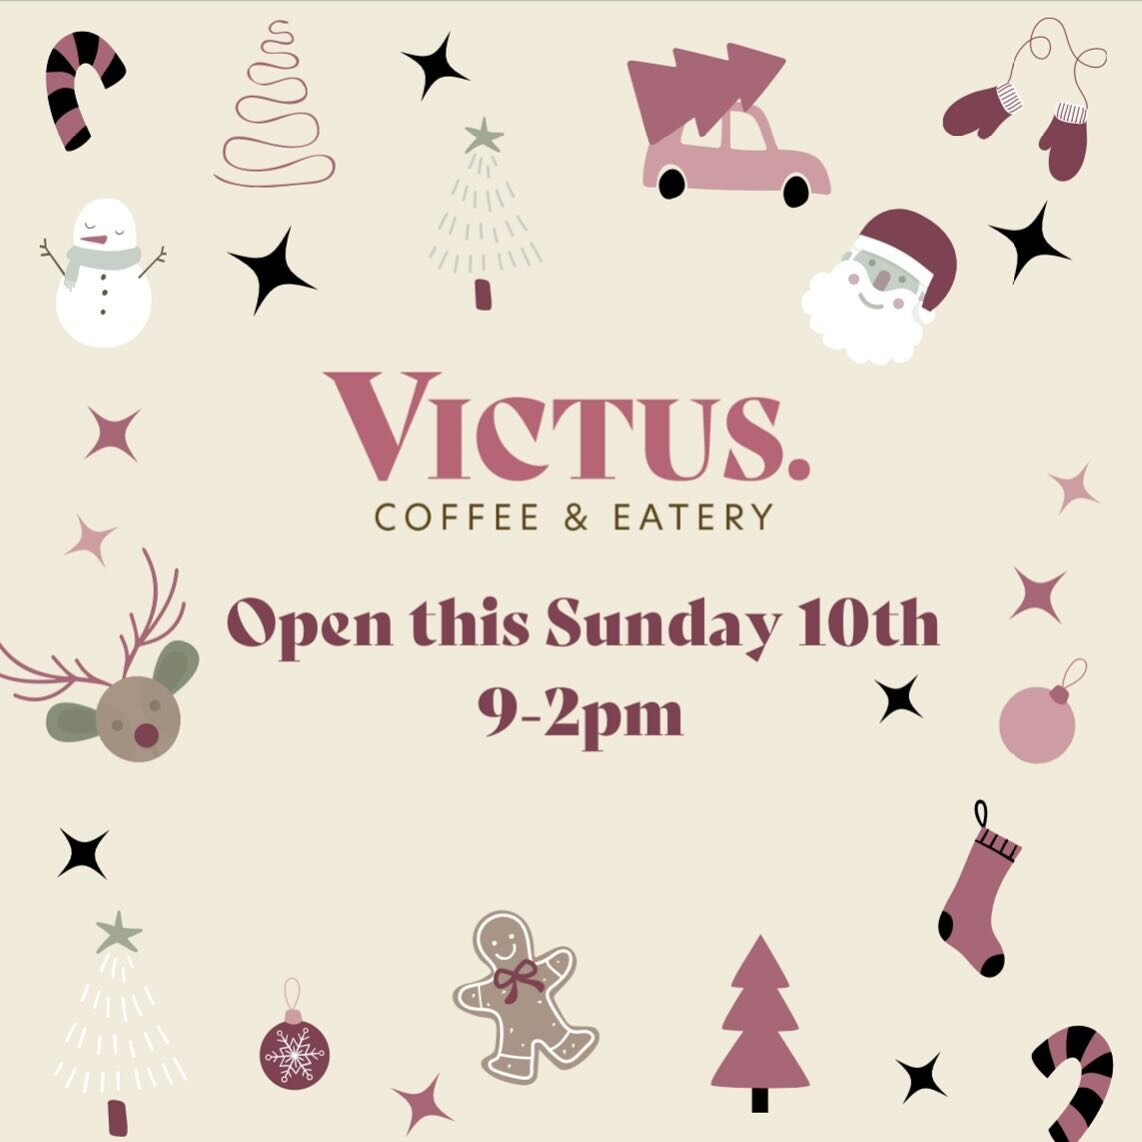 🌟 Exciting news 🌟 

We are open this Sunday 10th for the Nelson Santa parade 🎅🏼 
We&rsquo;ll have coffee, cake, cabinet and all the yummy baking available. Come &amp; support local. @littlebeehivecoop @ @grncollective are open this side of town f